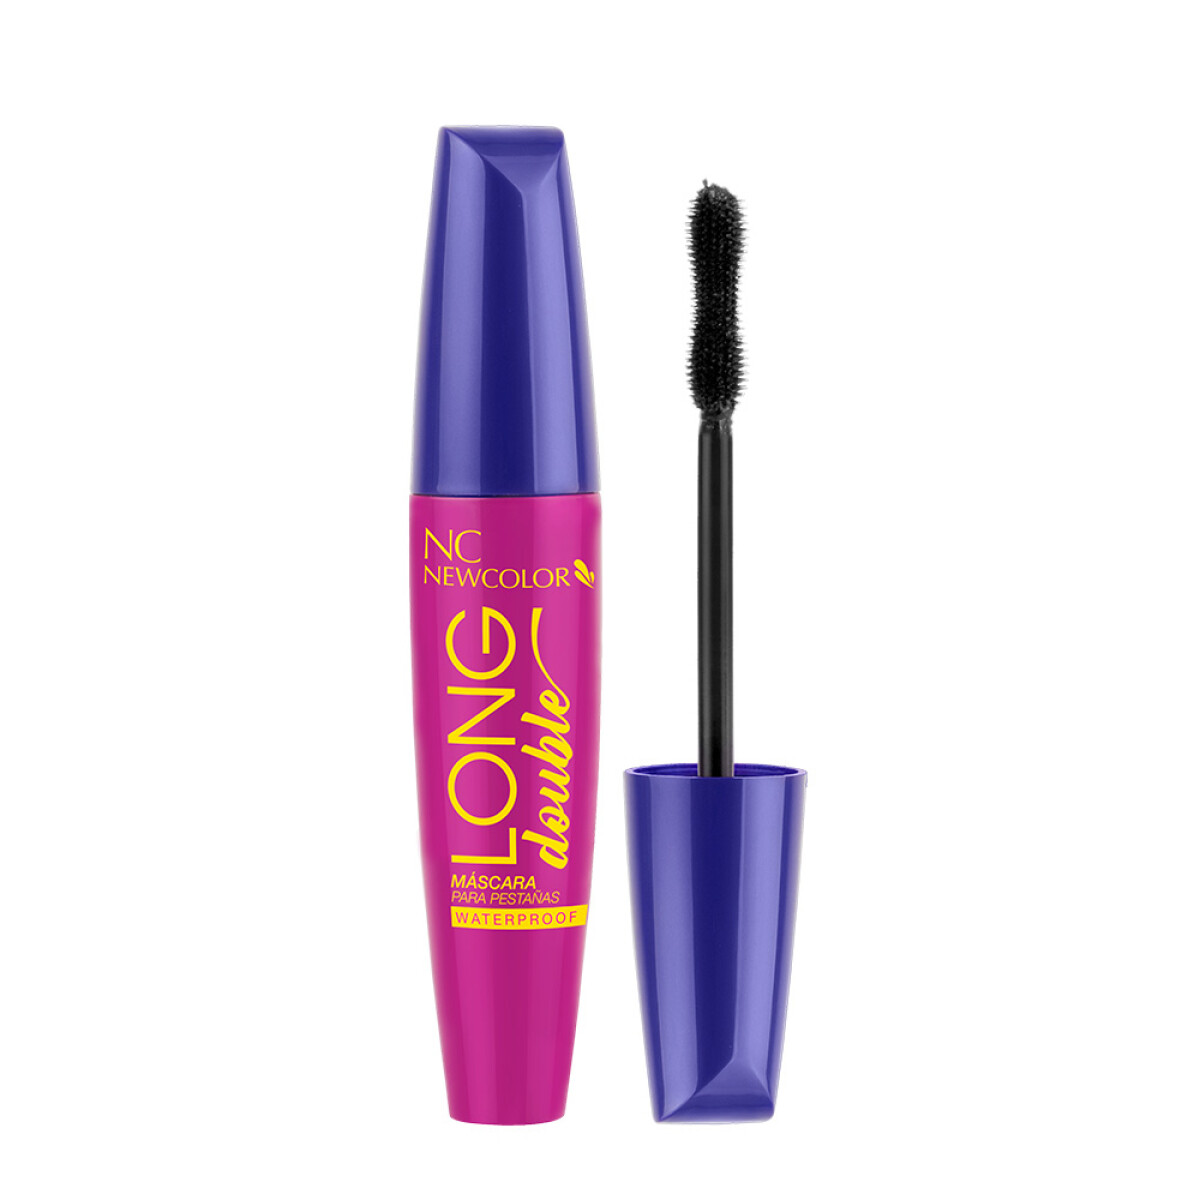 NEWCOLOR MASCARA P/PEST LONG DOUBLE WAT BLISTER X 12 ml 